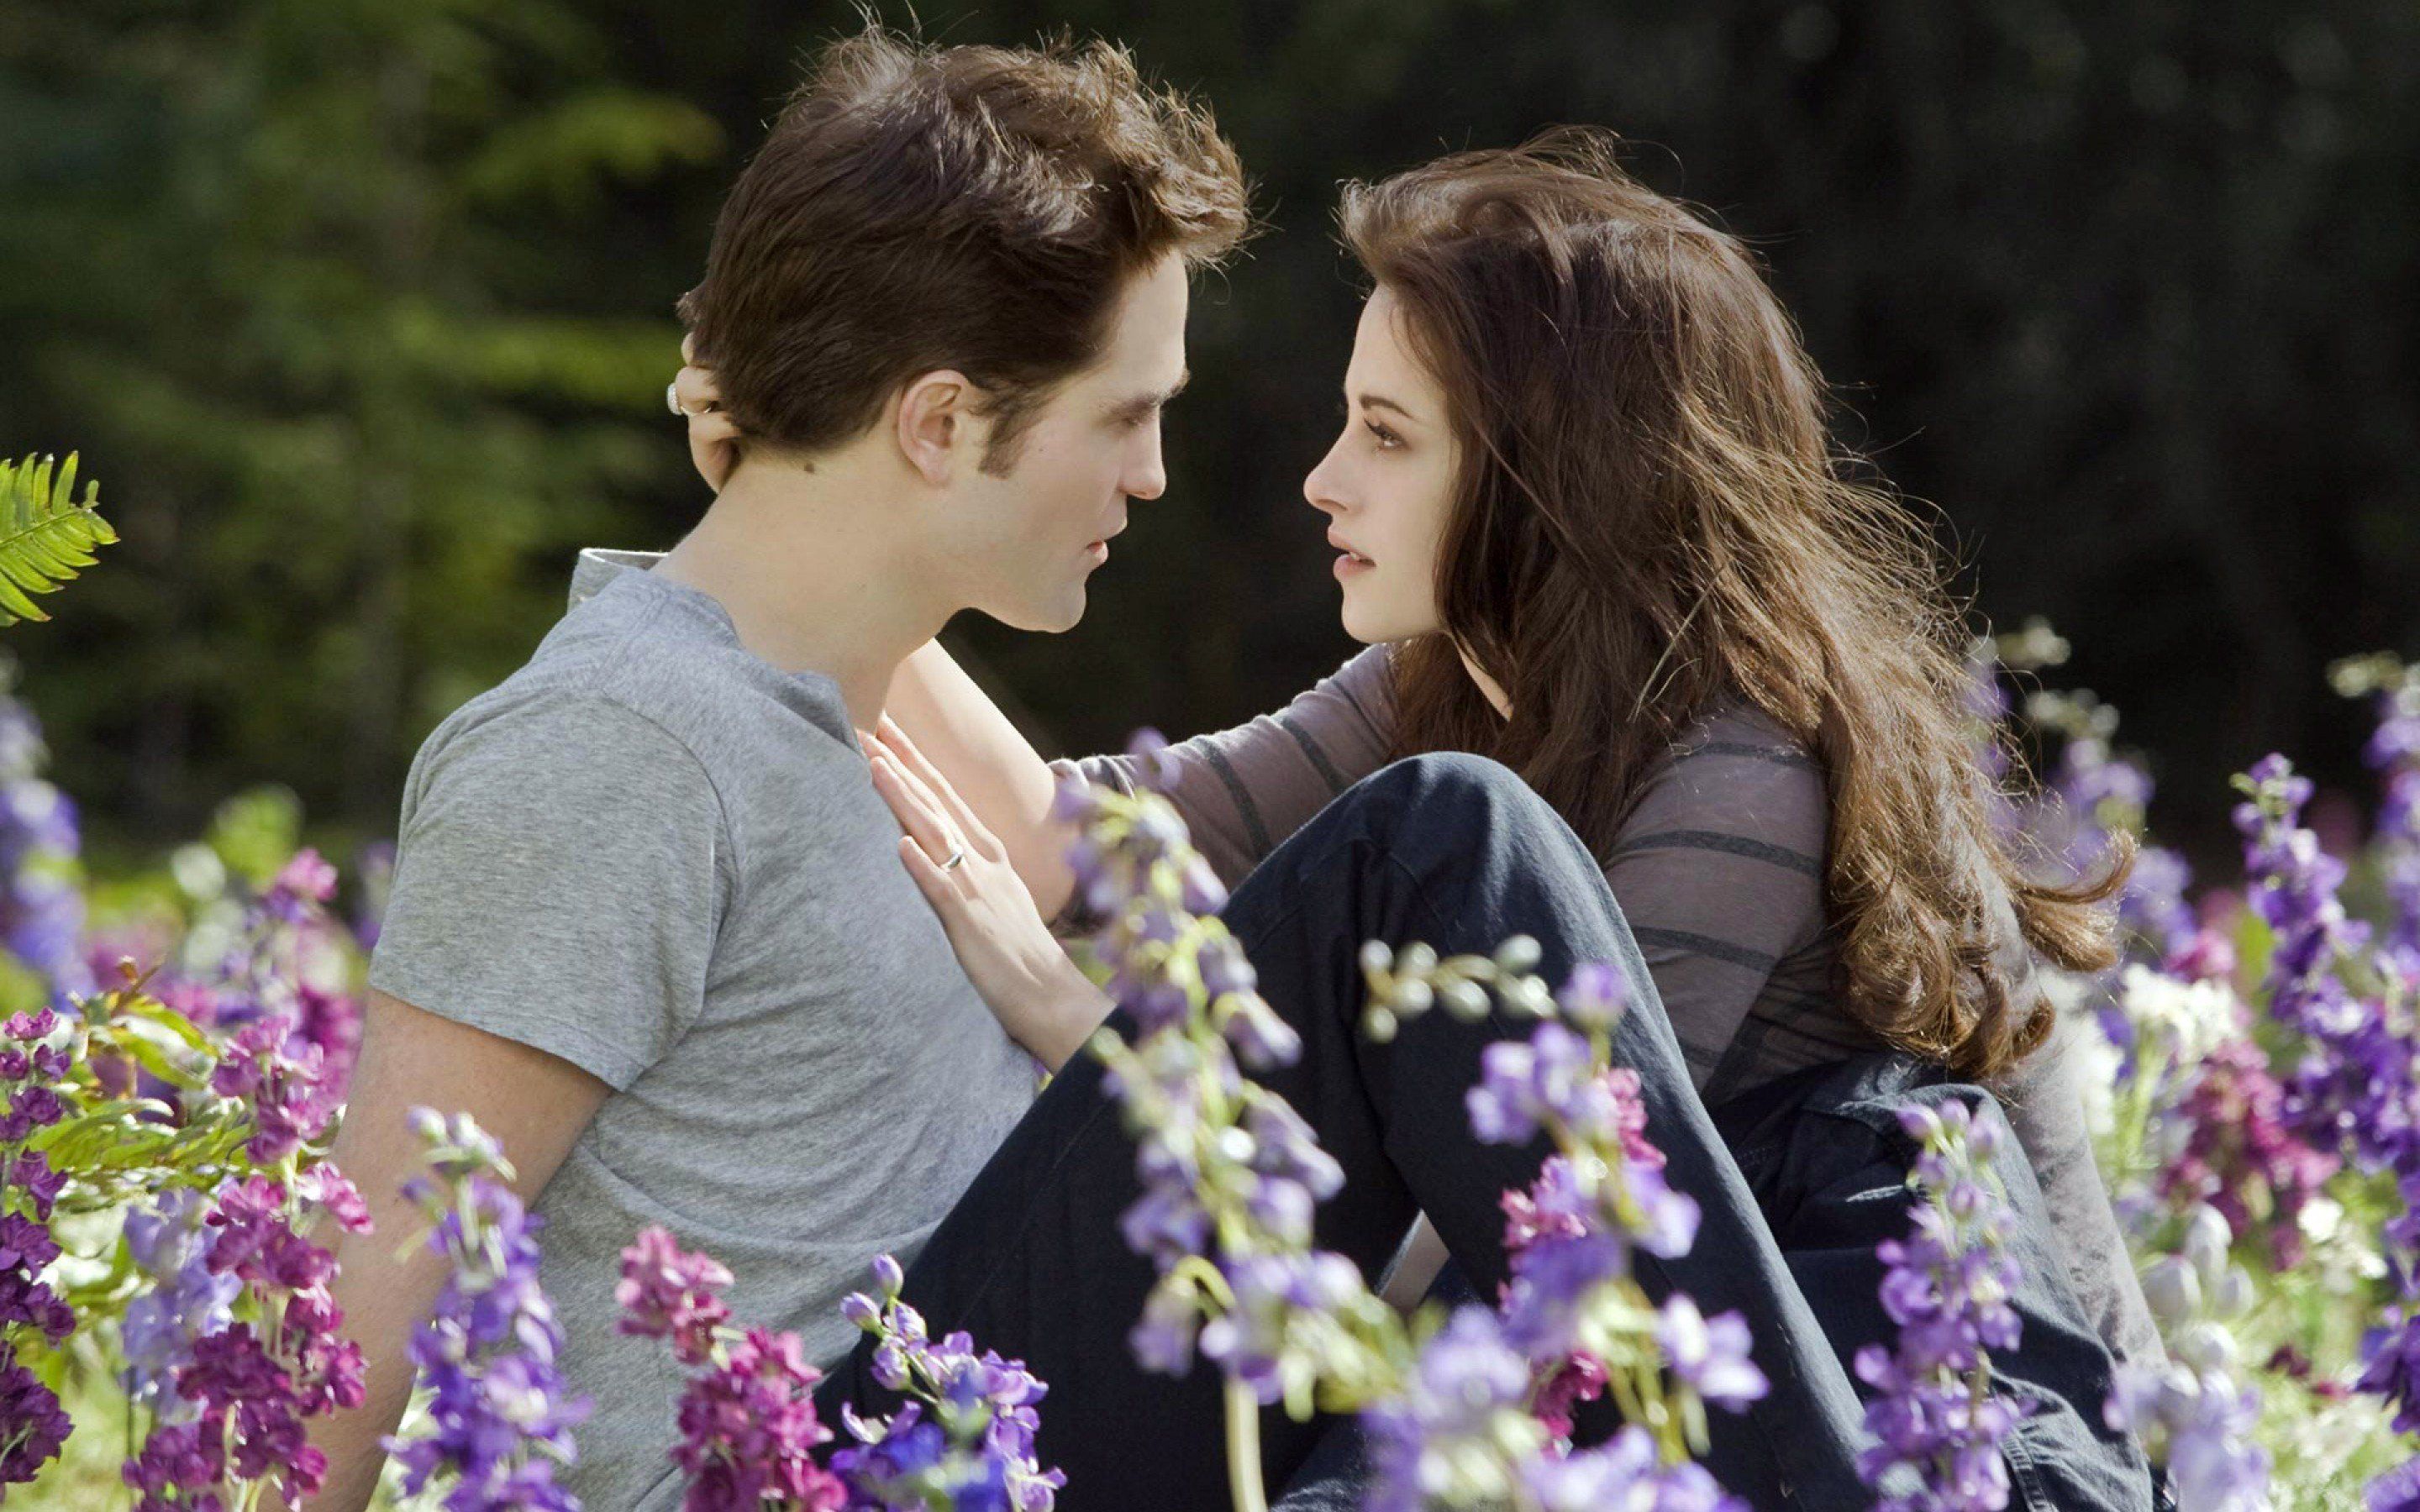 Midnight Sun' is the highly anticipated 'Twilight' book fans have been  waiting for - Good Morning America